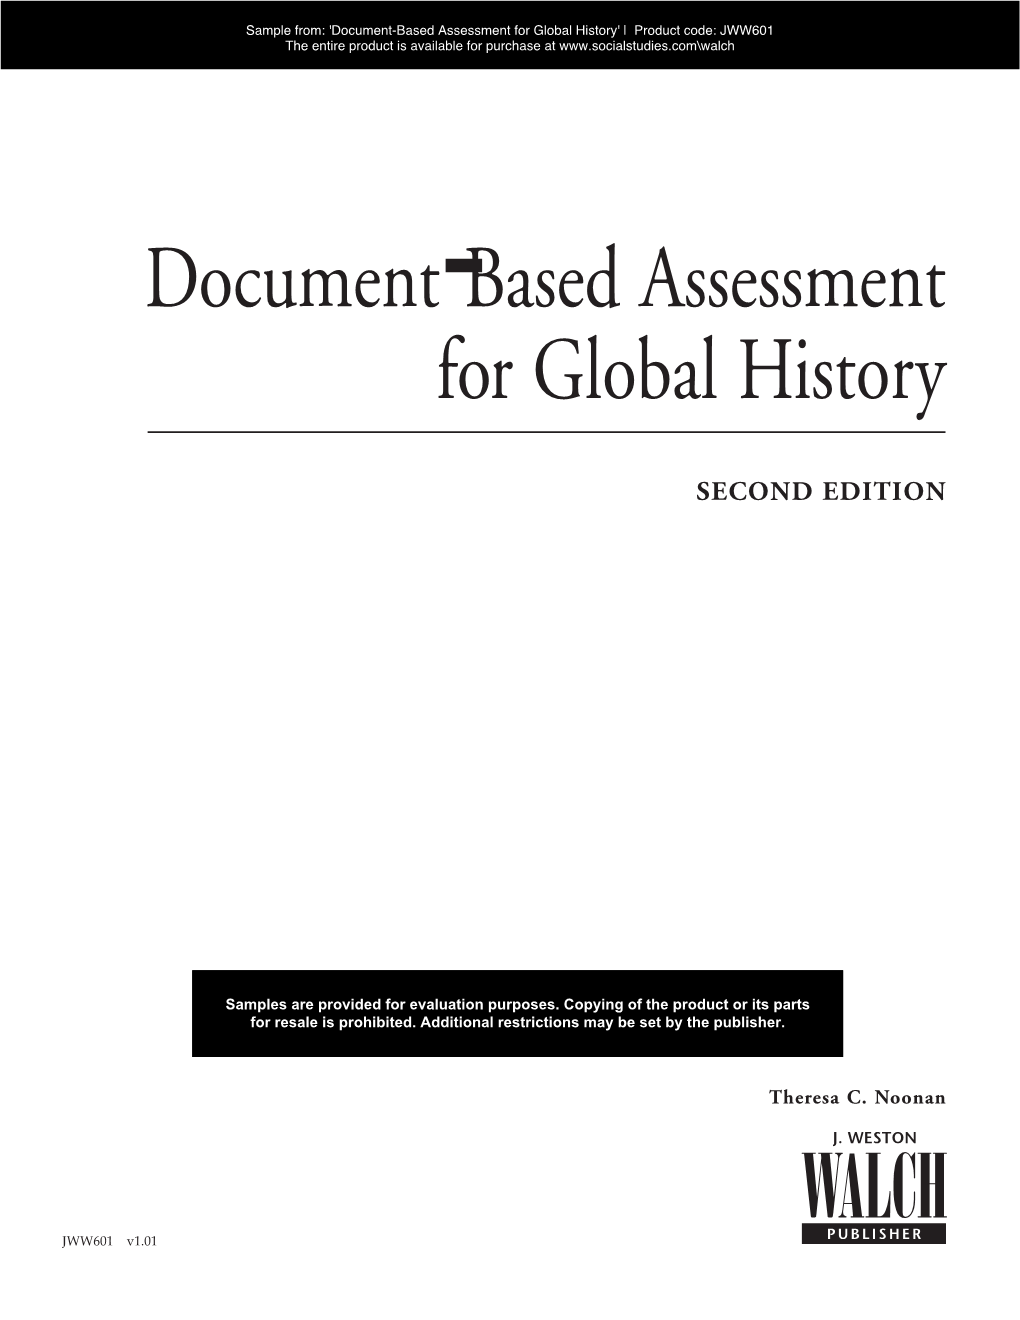 Document-Based Assessment for Global History' | Product Code: JWW601 the Entire Product Is Available for Purchase At